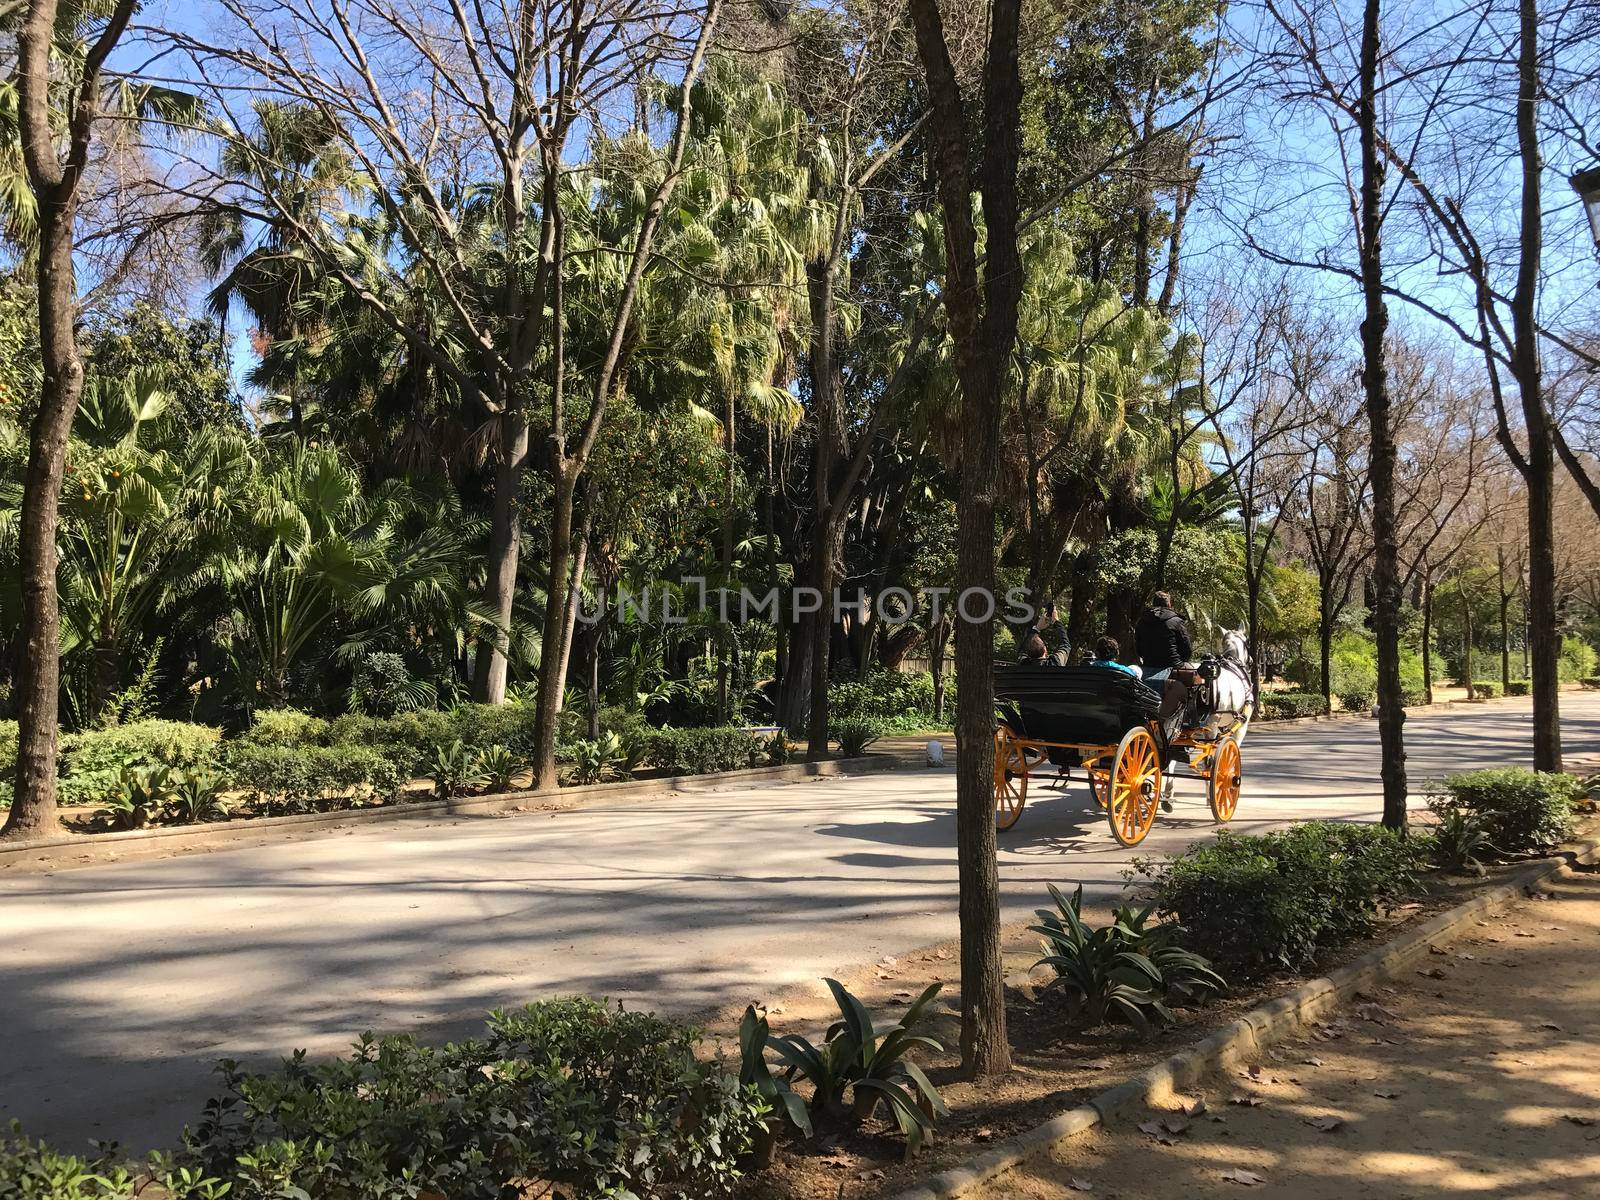 Horse and carriage in Maria Luisa Park by traveltelly